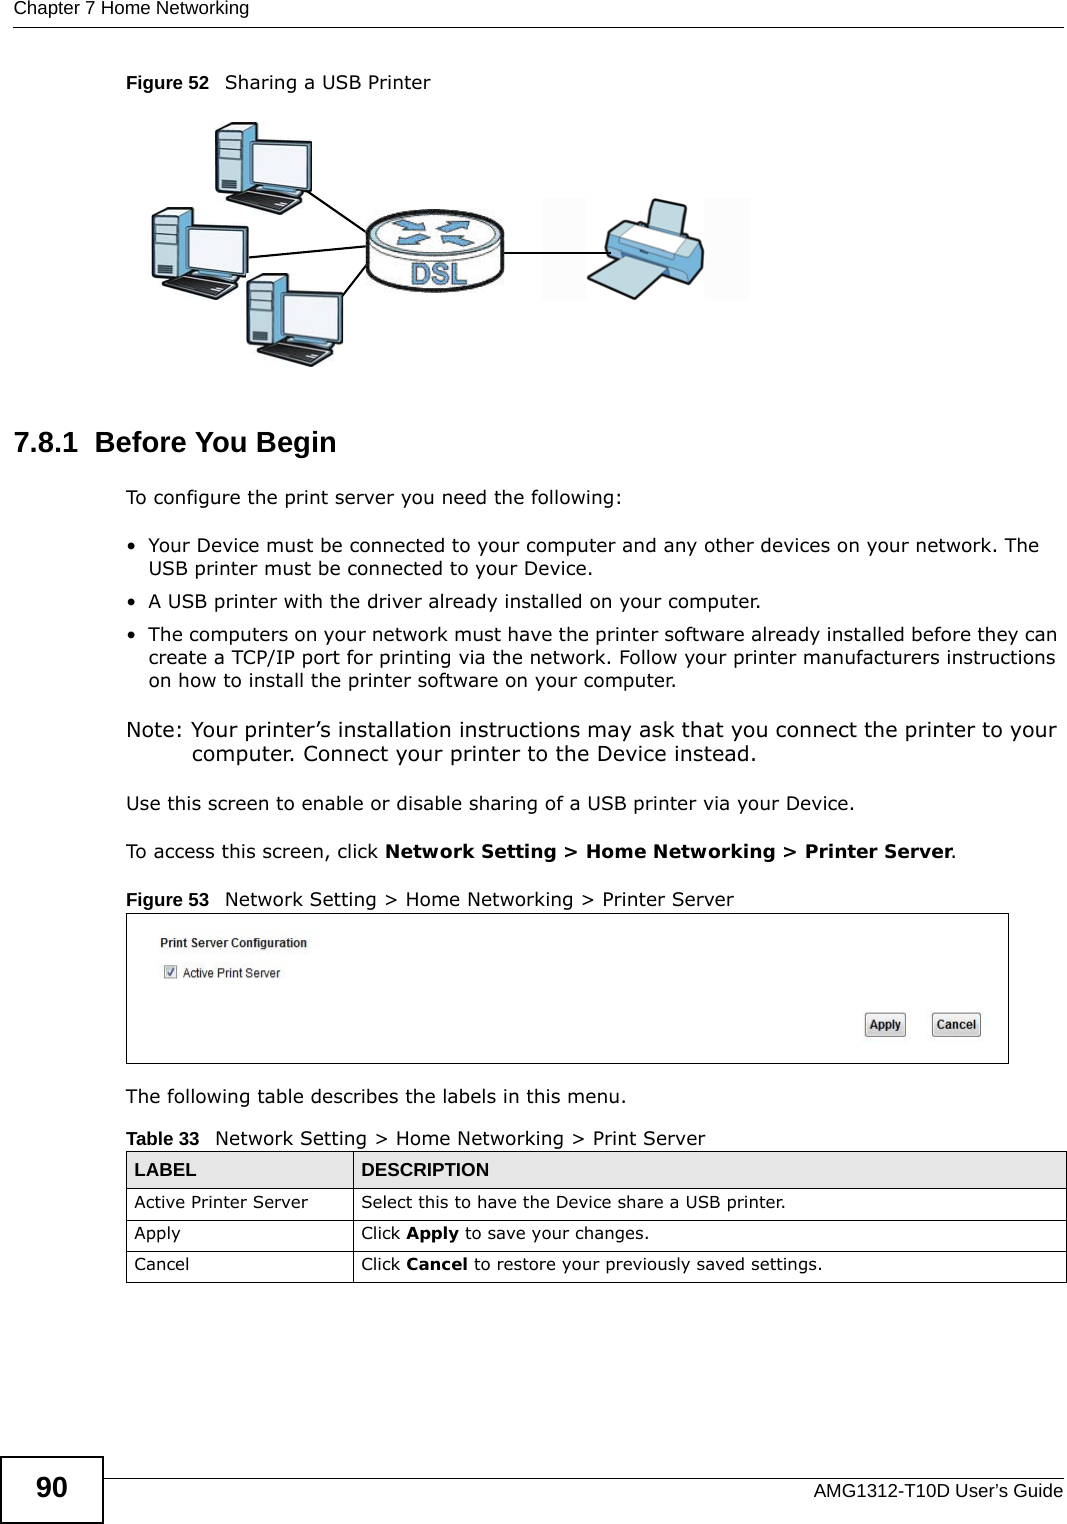 Chapter 7 Home NetworkingAMG1312-T10D User’s Guide90Figure 52   Sharing a USB Printer7.8.1  Before You BeginTo configure the print server you need the following:• Your Device must be connected to your computer and any other devices on your network. The USB printer must be connected to your Device.• A USB printer with the driver already installed on your computer.• The computers on your network must have the printer software already installed before they can create a TCP/IP port for printing via the network. Follow your printer manufacturers instructions on how to install the printer software on your computer. Note: Your printer’s installation instructions may ask that you connect the printer to your computer. Connect your printer to the Device instead.Use this screen to enable or disable sharing of a USB printer via your Device. To access this screen, click Network Setting &gt; Home Networking &gt; Printer Server.Figure 53   Network Setting &gt; Home Networking &gt; Printer ServerThe following table describes the labels in this menu.Table 33   Network Setting &gt; Home Networking &gt; Print ServerLABEL DESCRIPTIONActive Printer Server  Select this to have the Device share a USB printer.Apply Click Apply to save your changes.Cancel Click Cancel to restore your previously saved settings.